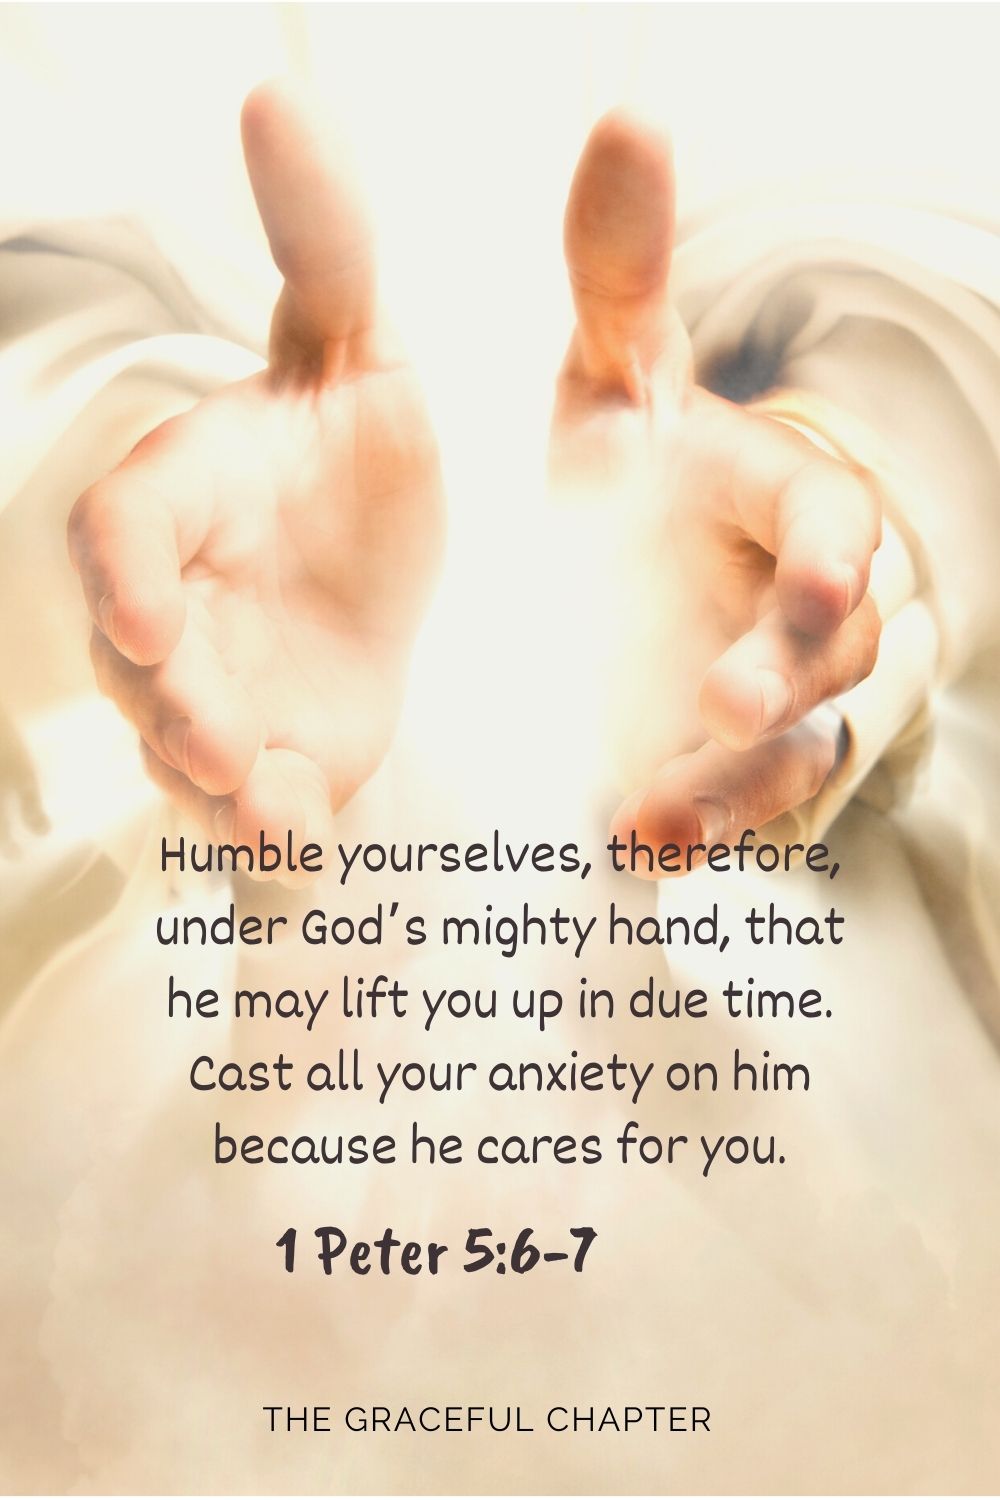 Humble yourselves, therefore, under God’s mighty hand, that he may lift you up in due time. Cast all your anxiety on him because he cares for you. 1 Peter 5:6-7